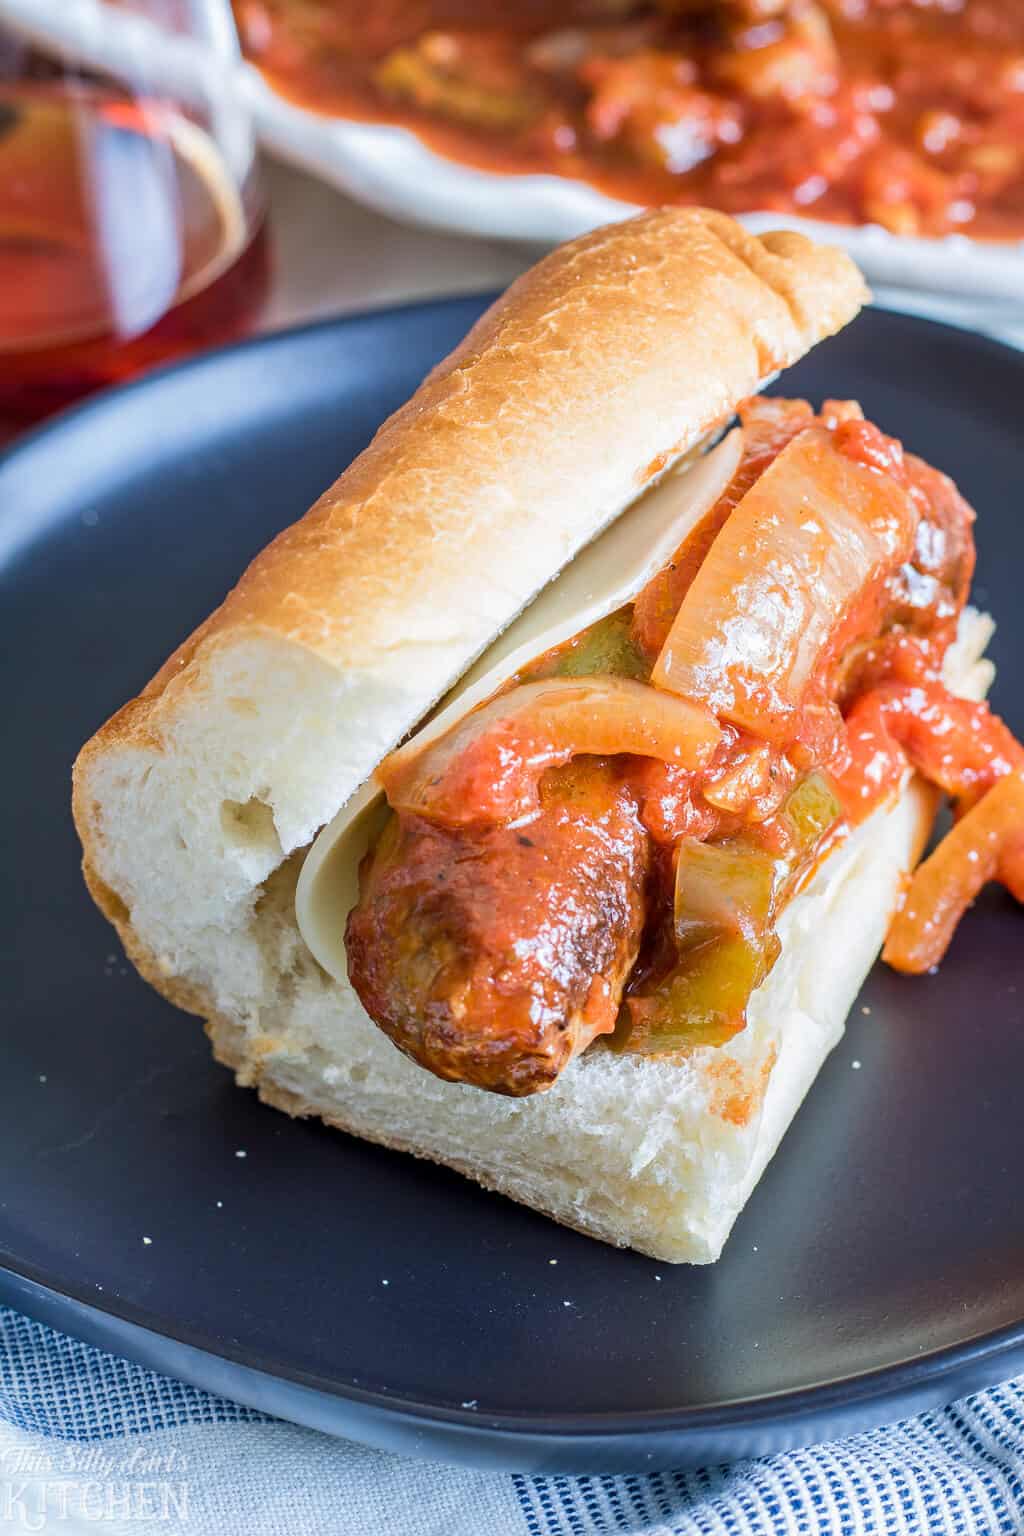 Sausage and Peppers on bun with cheese.